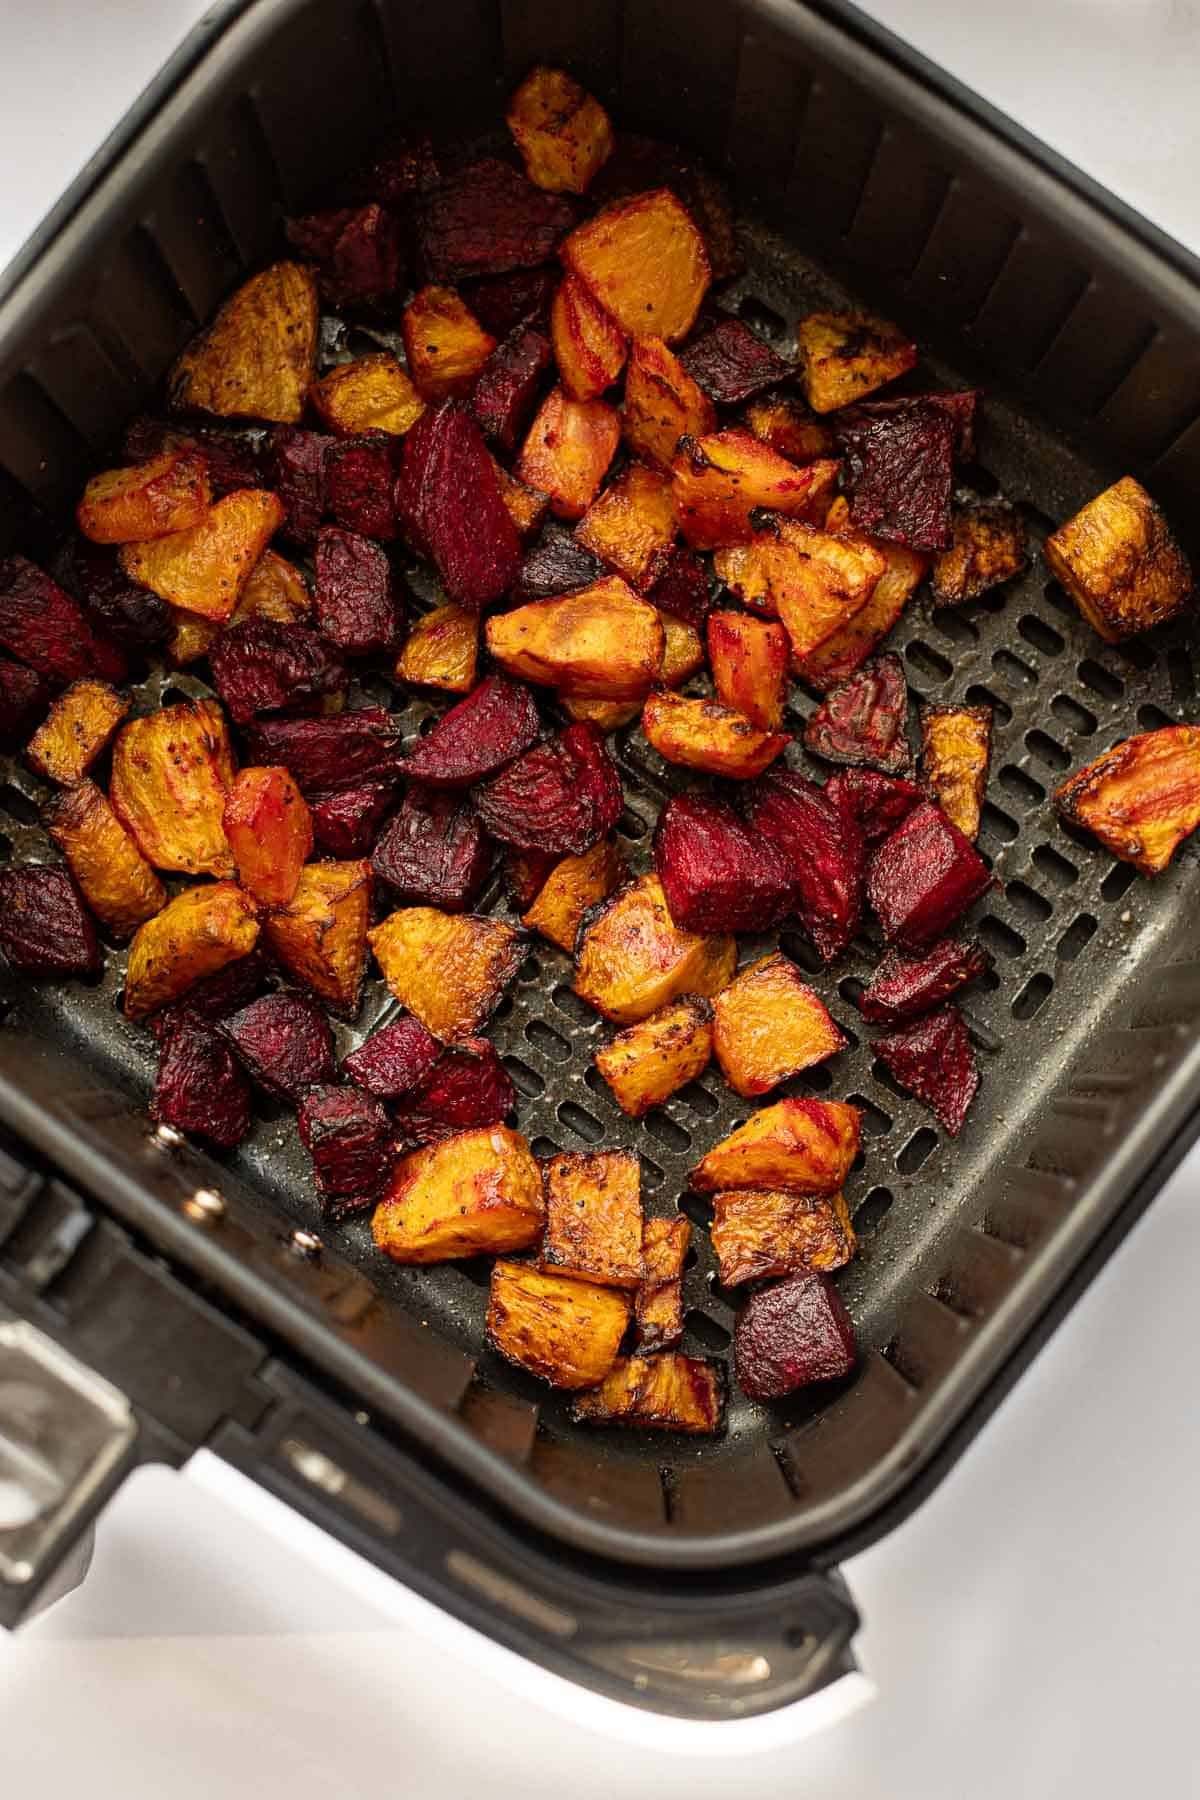 golden and red beets cooked in air fryer basket.